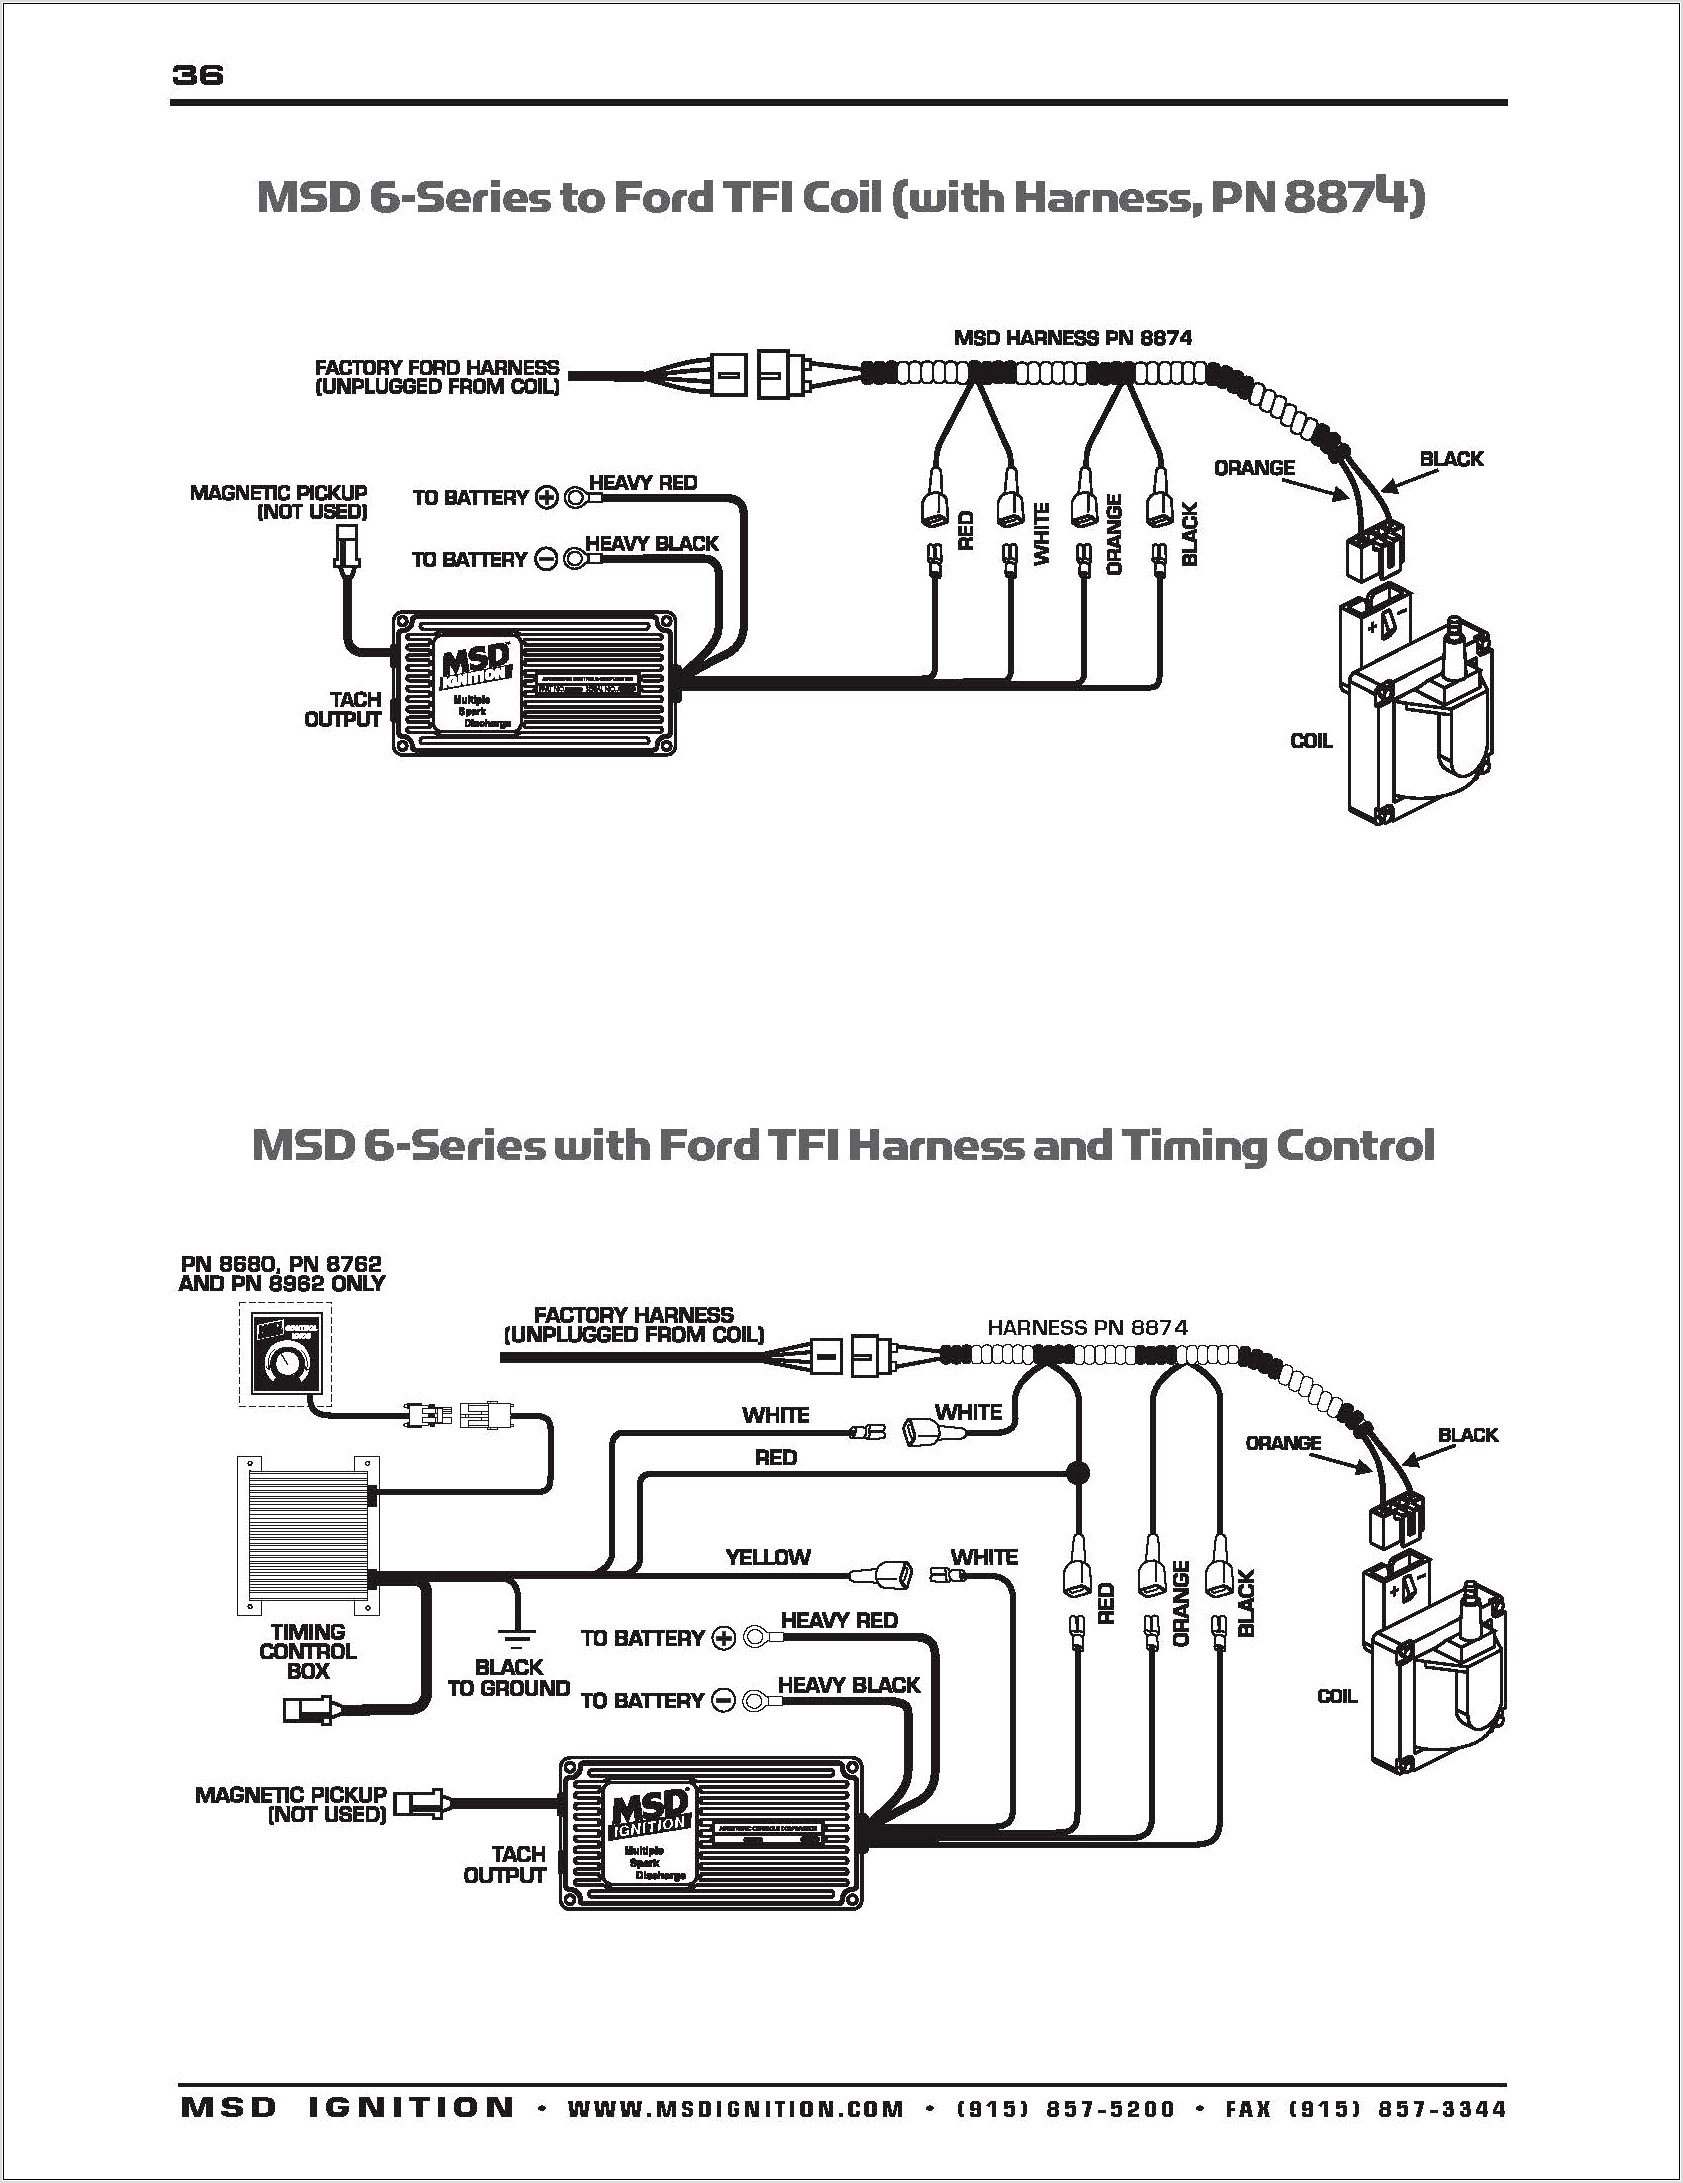 Msd Ignition Wiring Diagram Ford